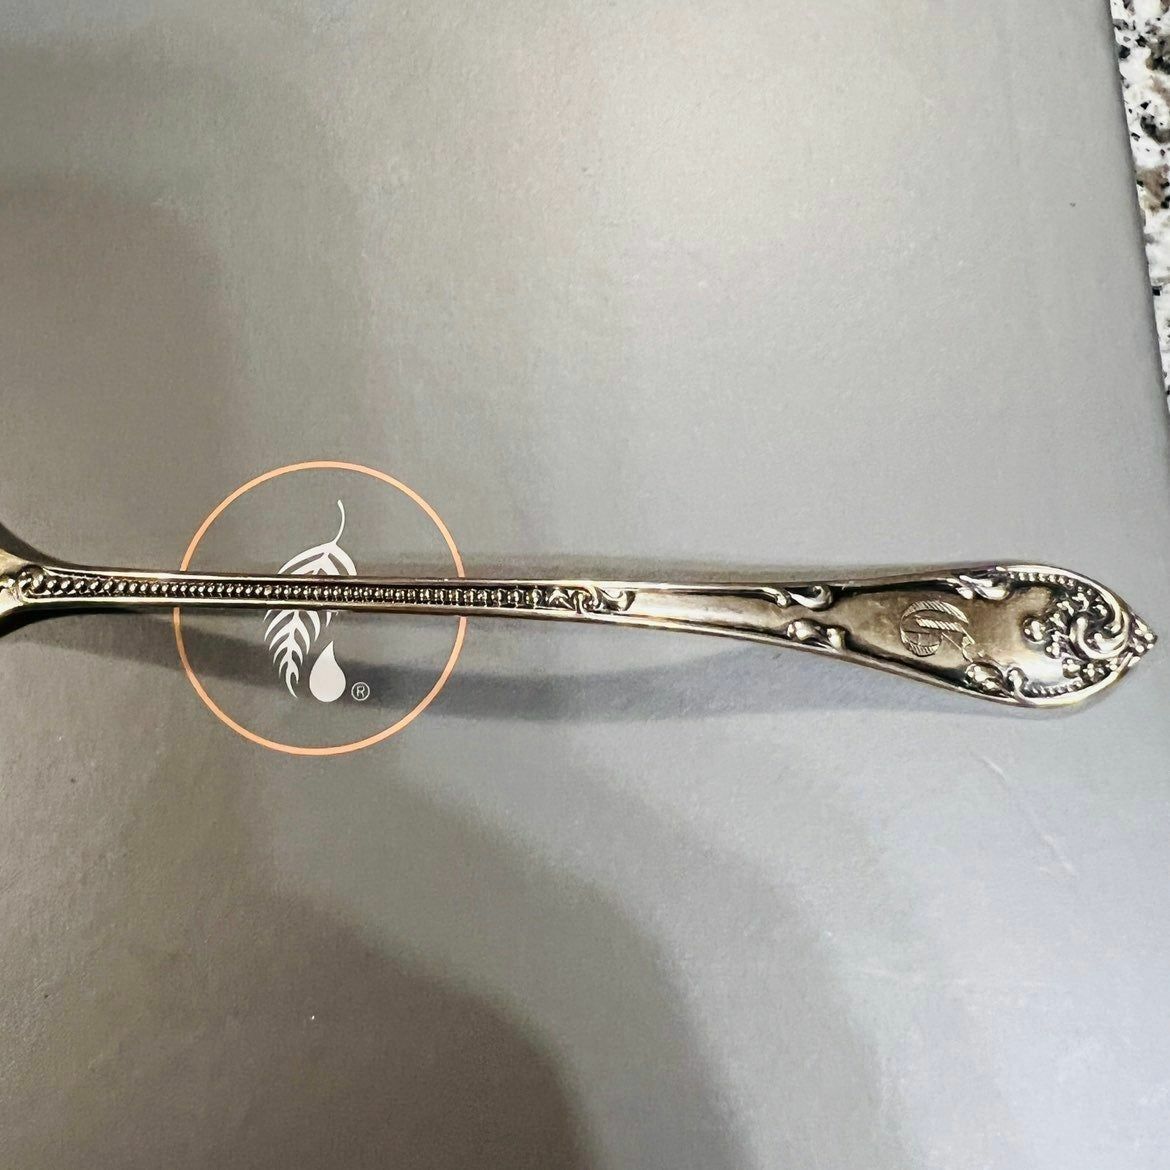 Towle Ladle Spoon Sterling Silver Rustic Pattern Sauce Gold Wash Monogram 5 1/8